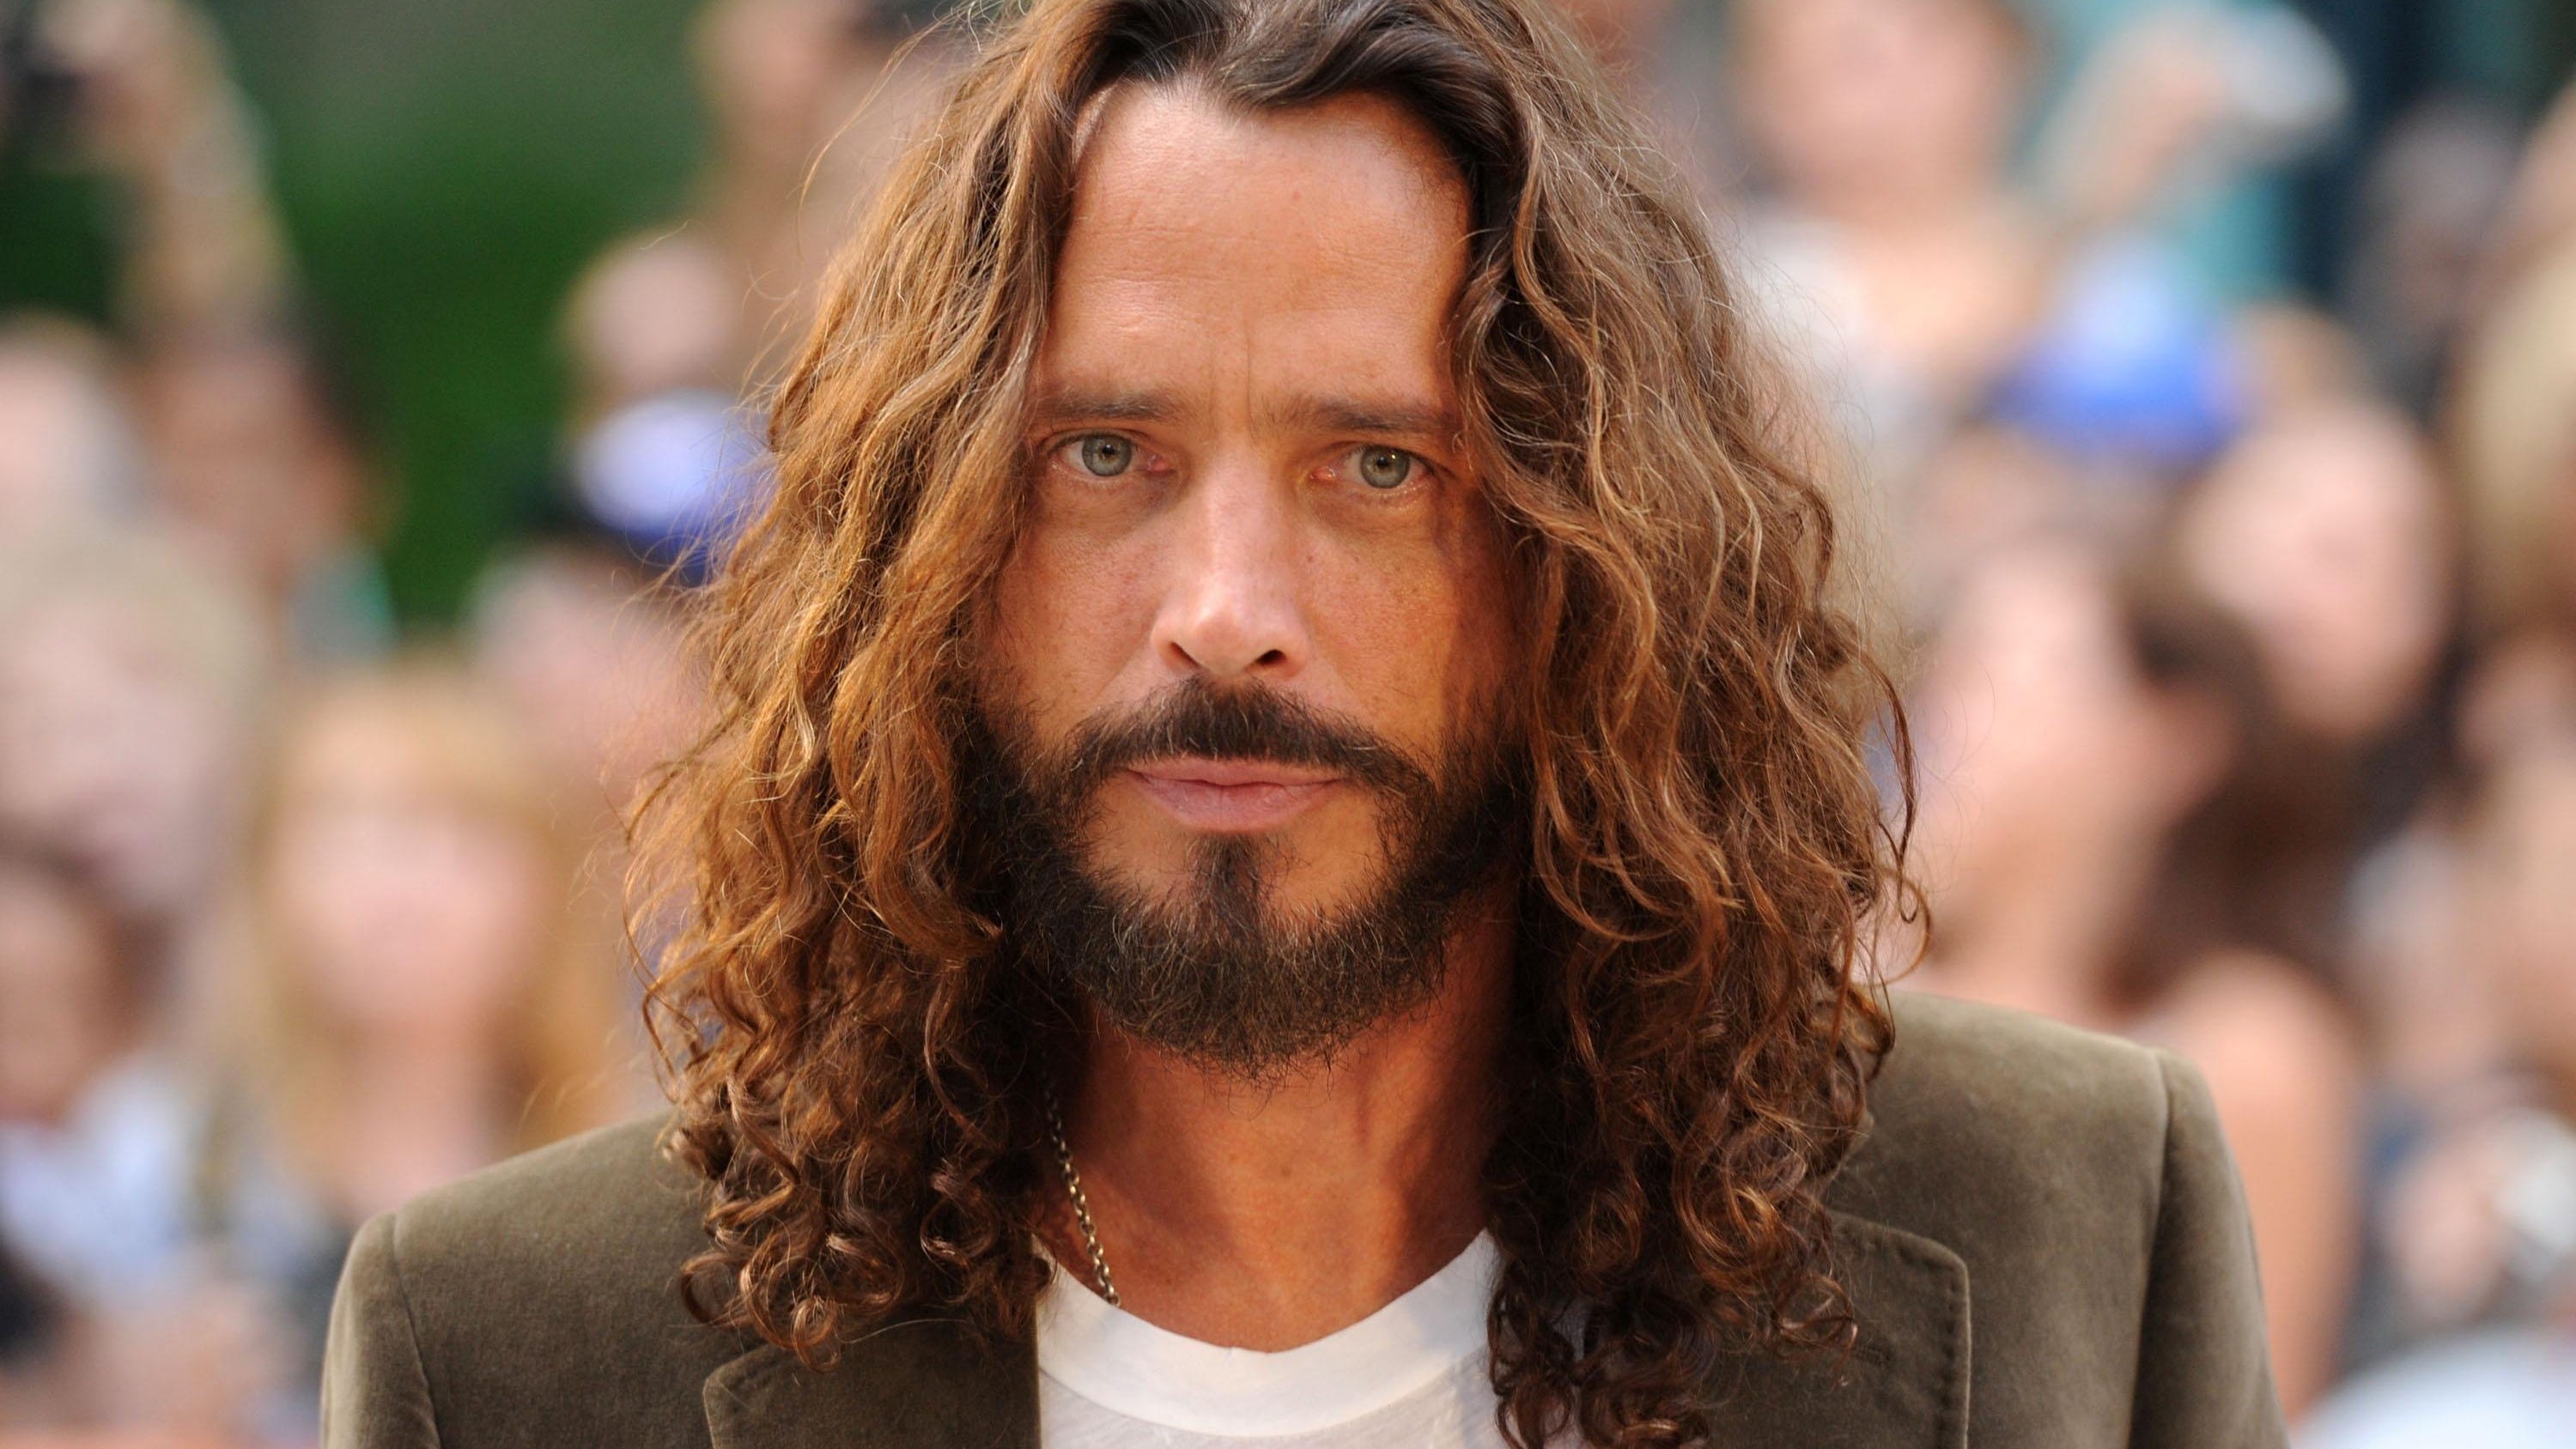 Autopsy reports show Soundgarden frontman Chris Cornell had sedatives and an anxiety drug in his system on the night he died by hanging himself in his Detroit hotel room.